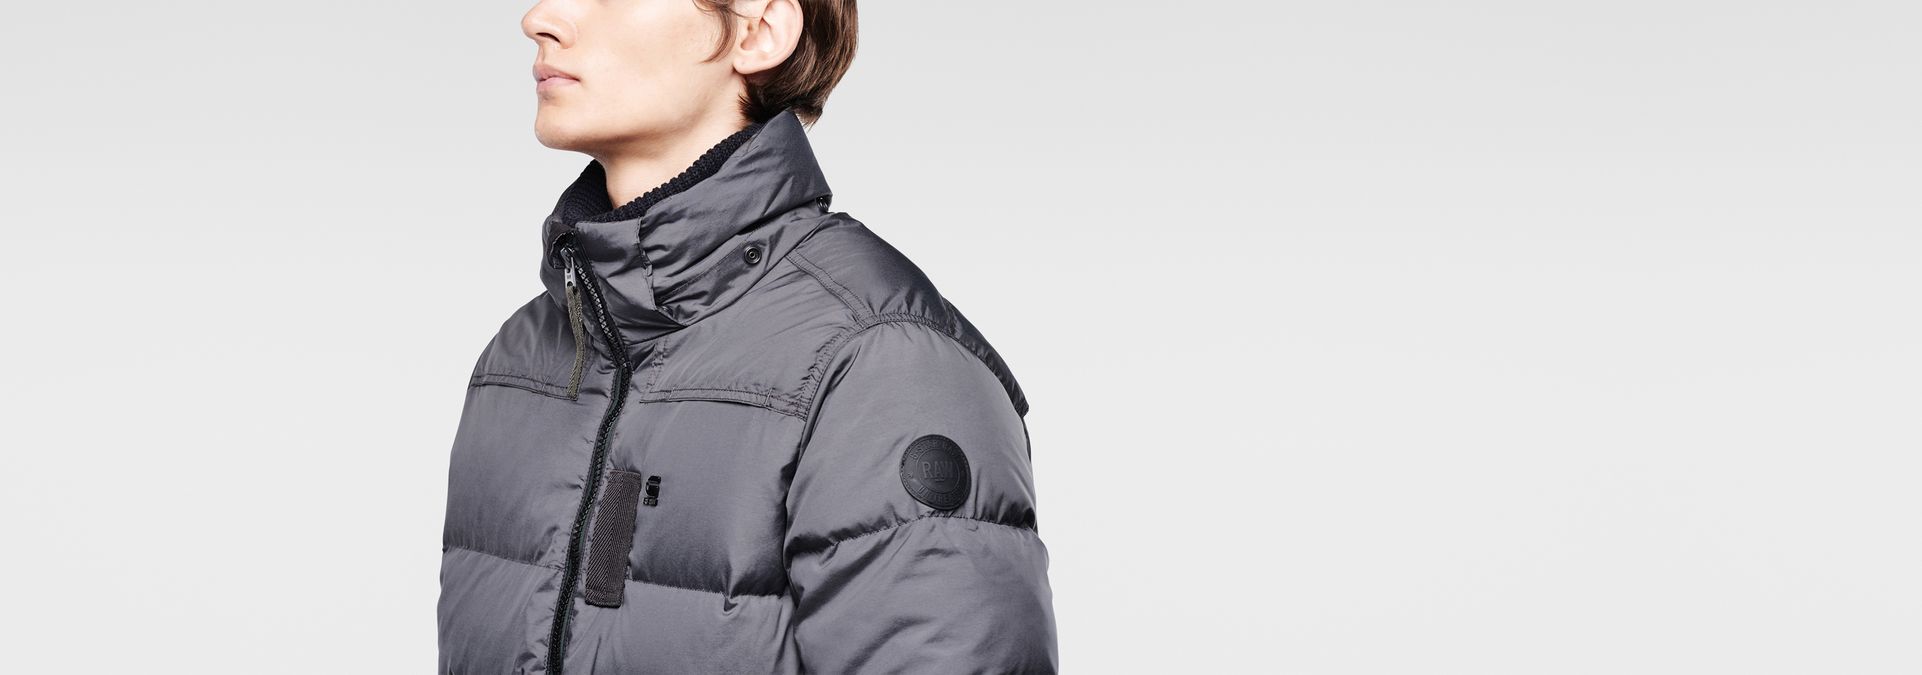 Whistler Hooded Down Jacket | グレー | G-Star RAW®